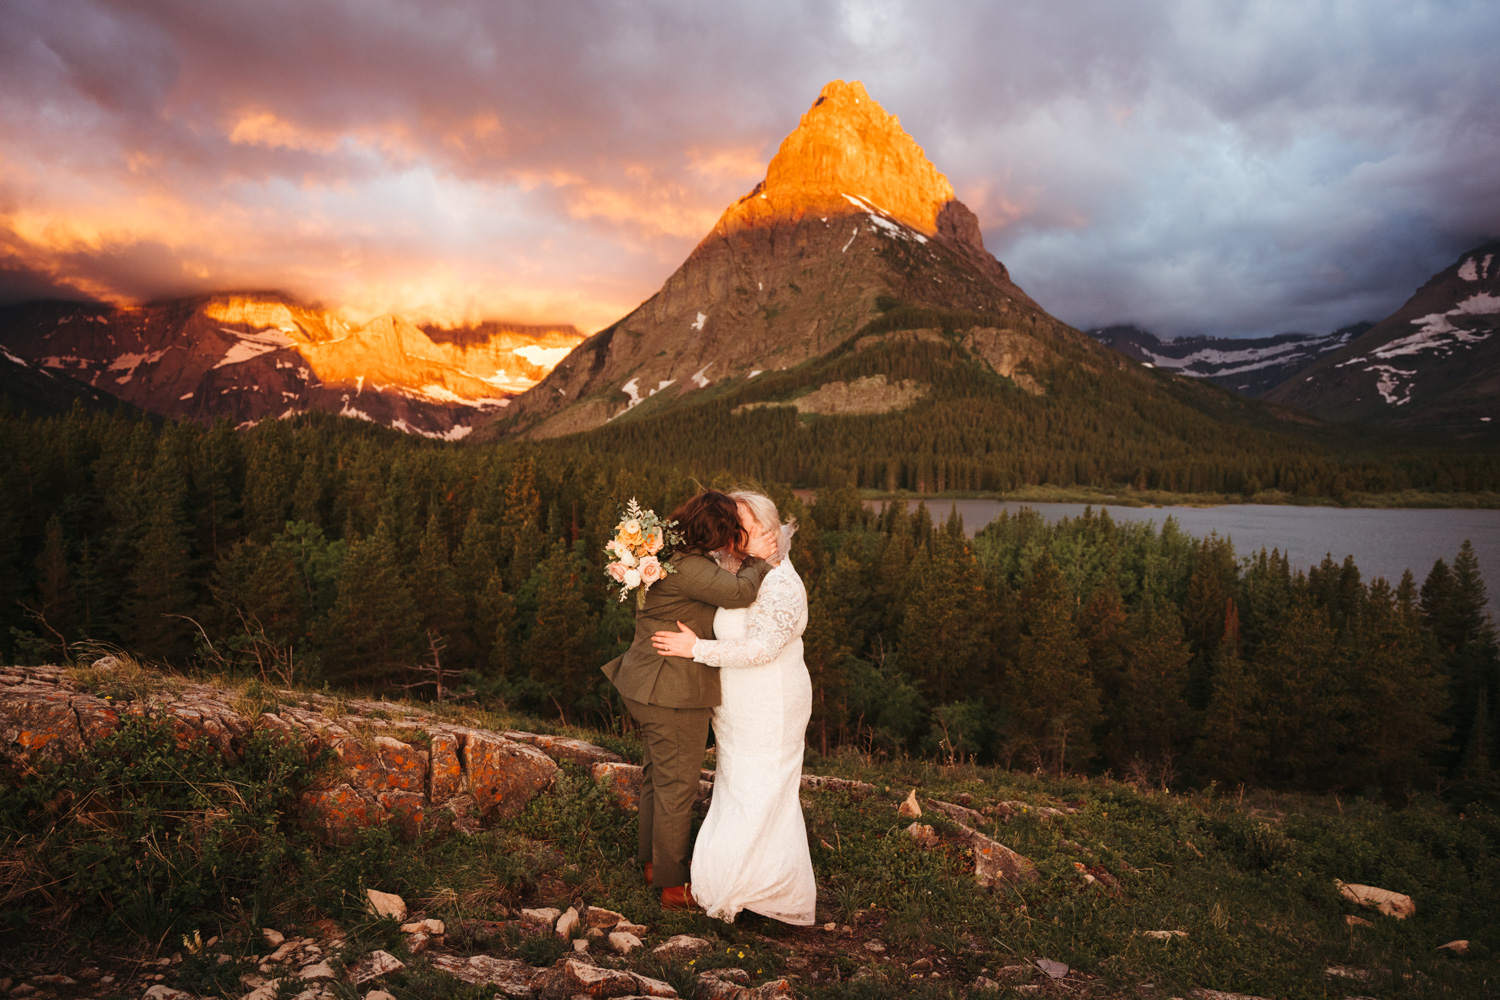 A couple embracing during sunrise on their elopement day in Glacier National Park. Behind them is a mountain lit up orange by the morning sun.